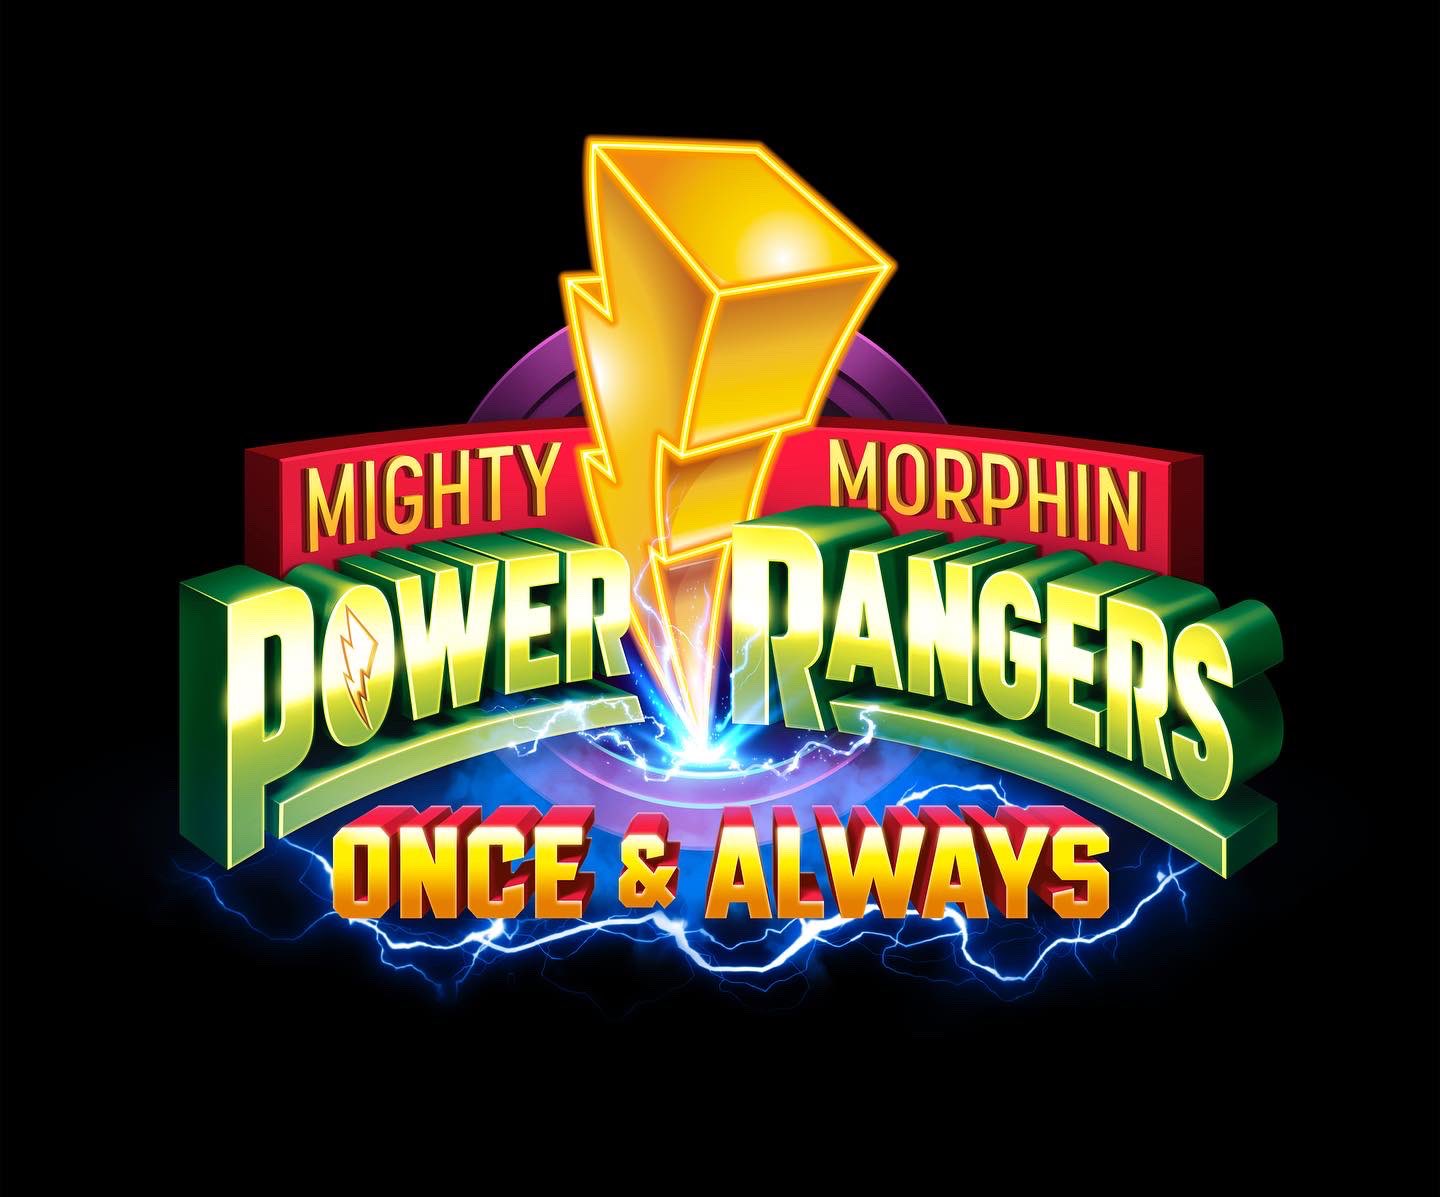 Might Morphin Power Rangers: Once & Always logo